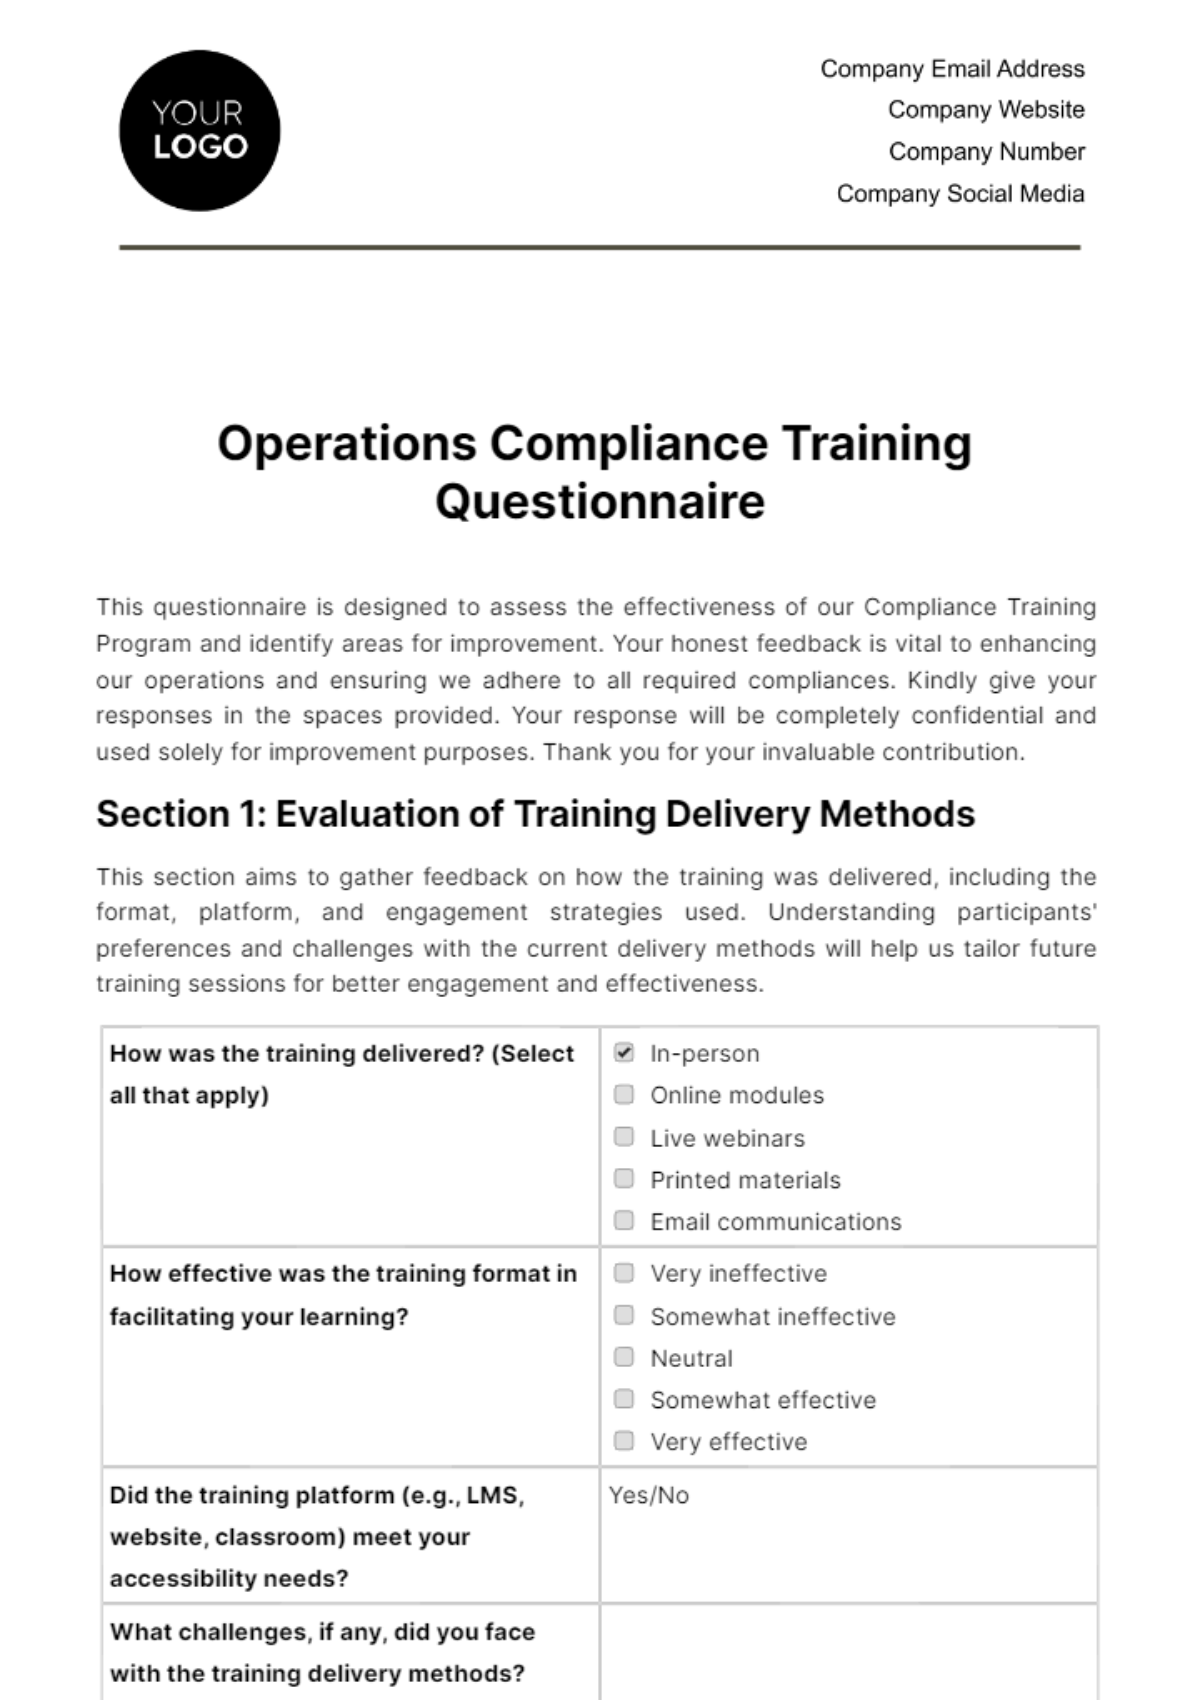 Free Operations Compliance Training Questionnaire Template